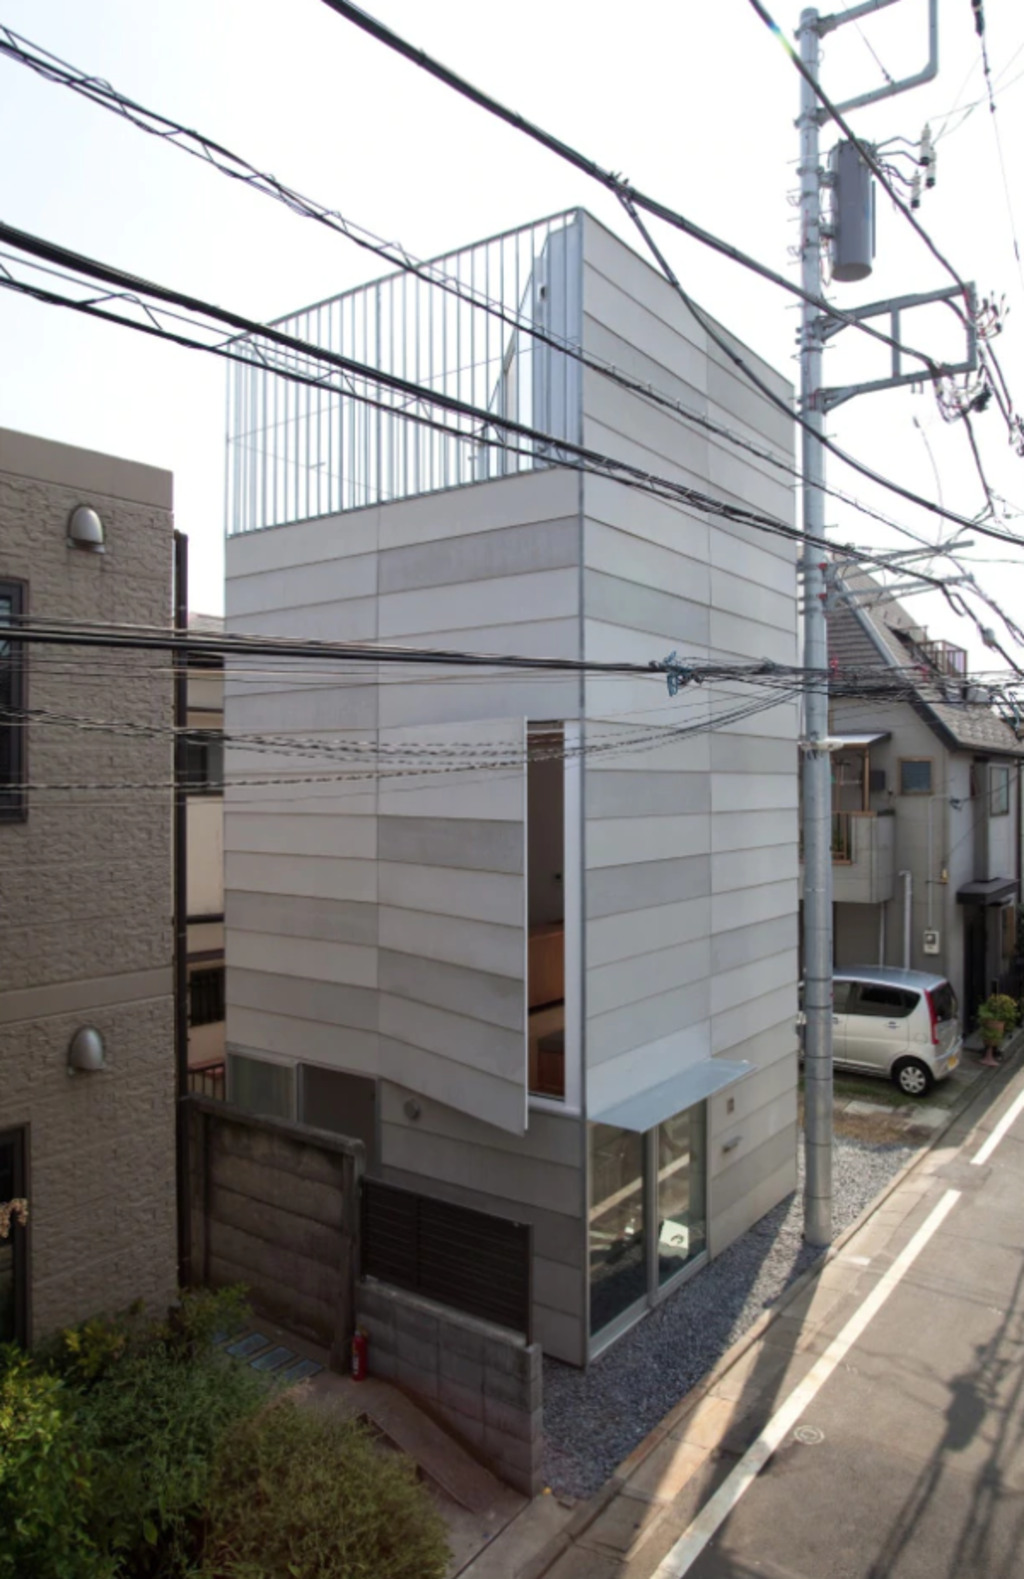 The house has a basement and four stories, with a roof terrace. Photo: Ken Sasajima